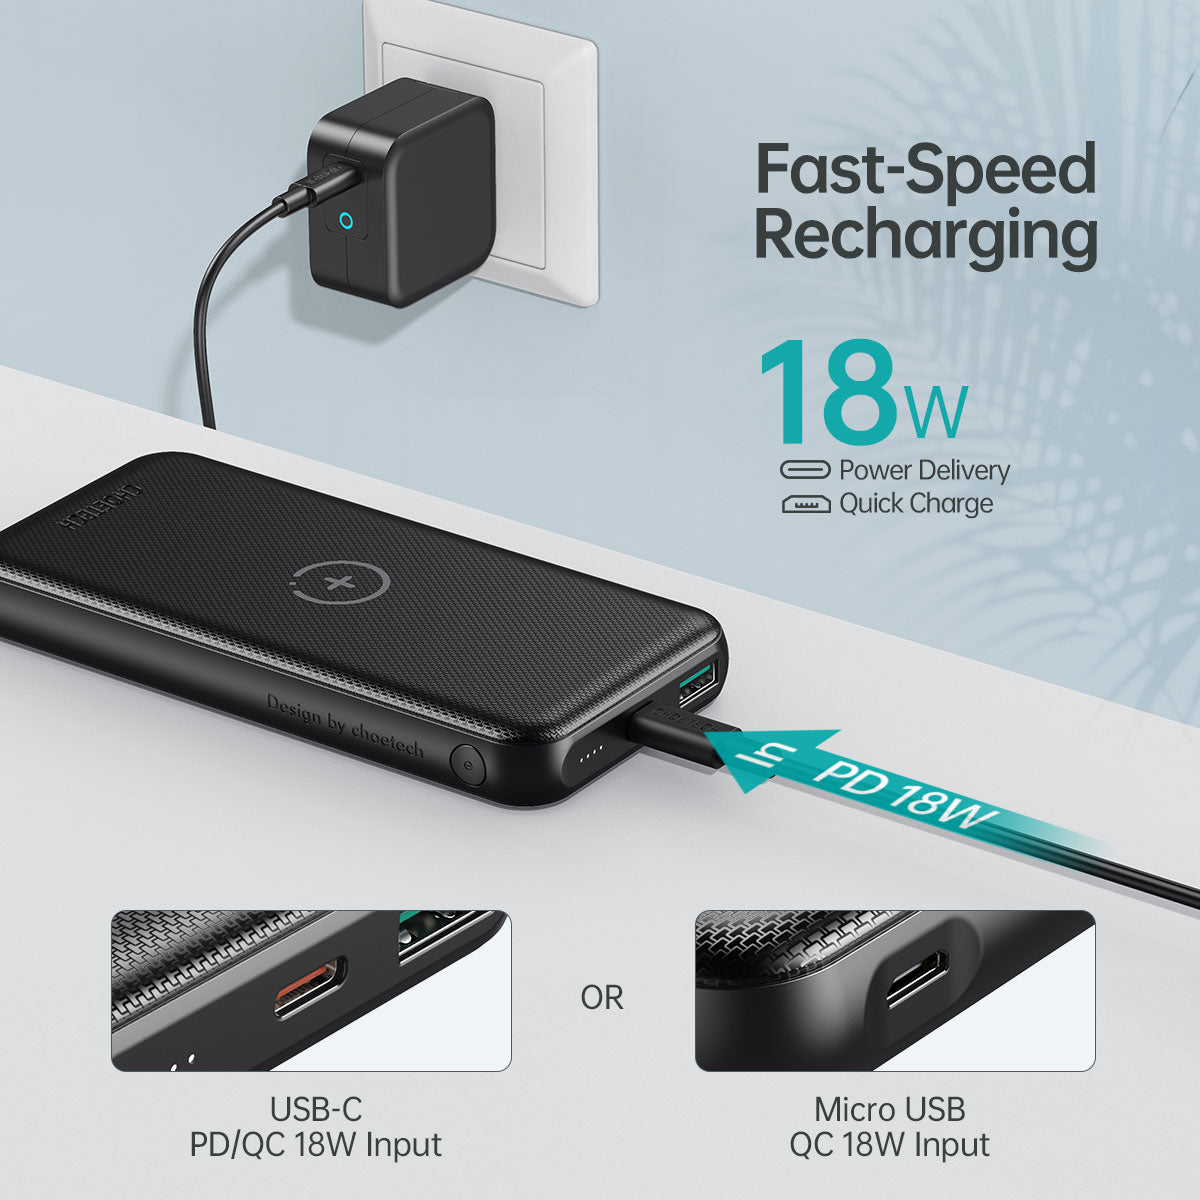 B650 CHOETECH Wireless Power Bank Qi Portable Charger for iPhone 12 External Battery QC 3.0 USB C 18W PD Fast Charger CHOETECH